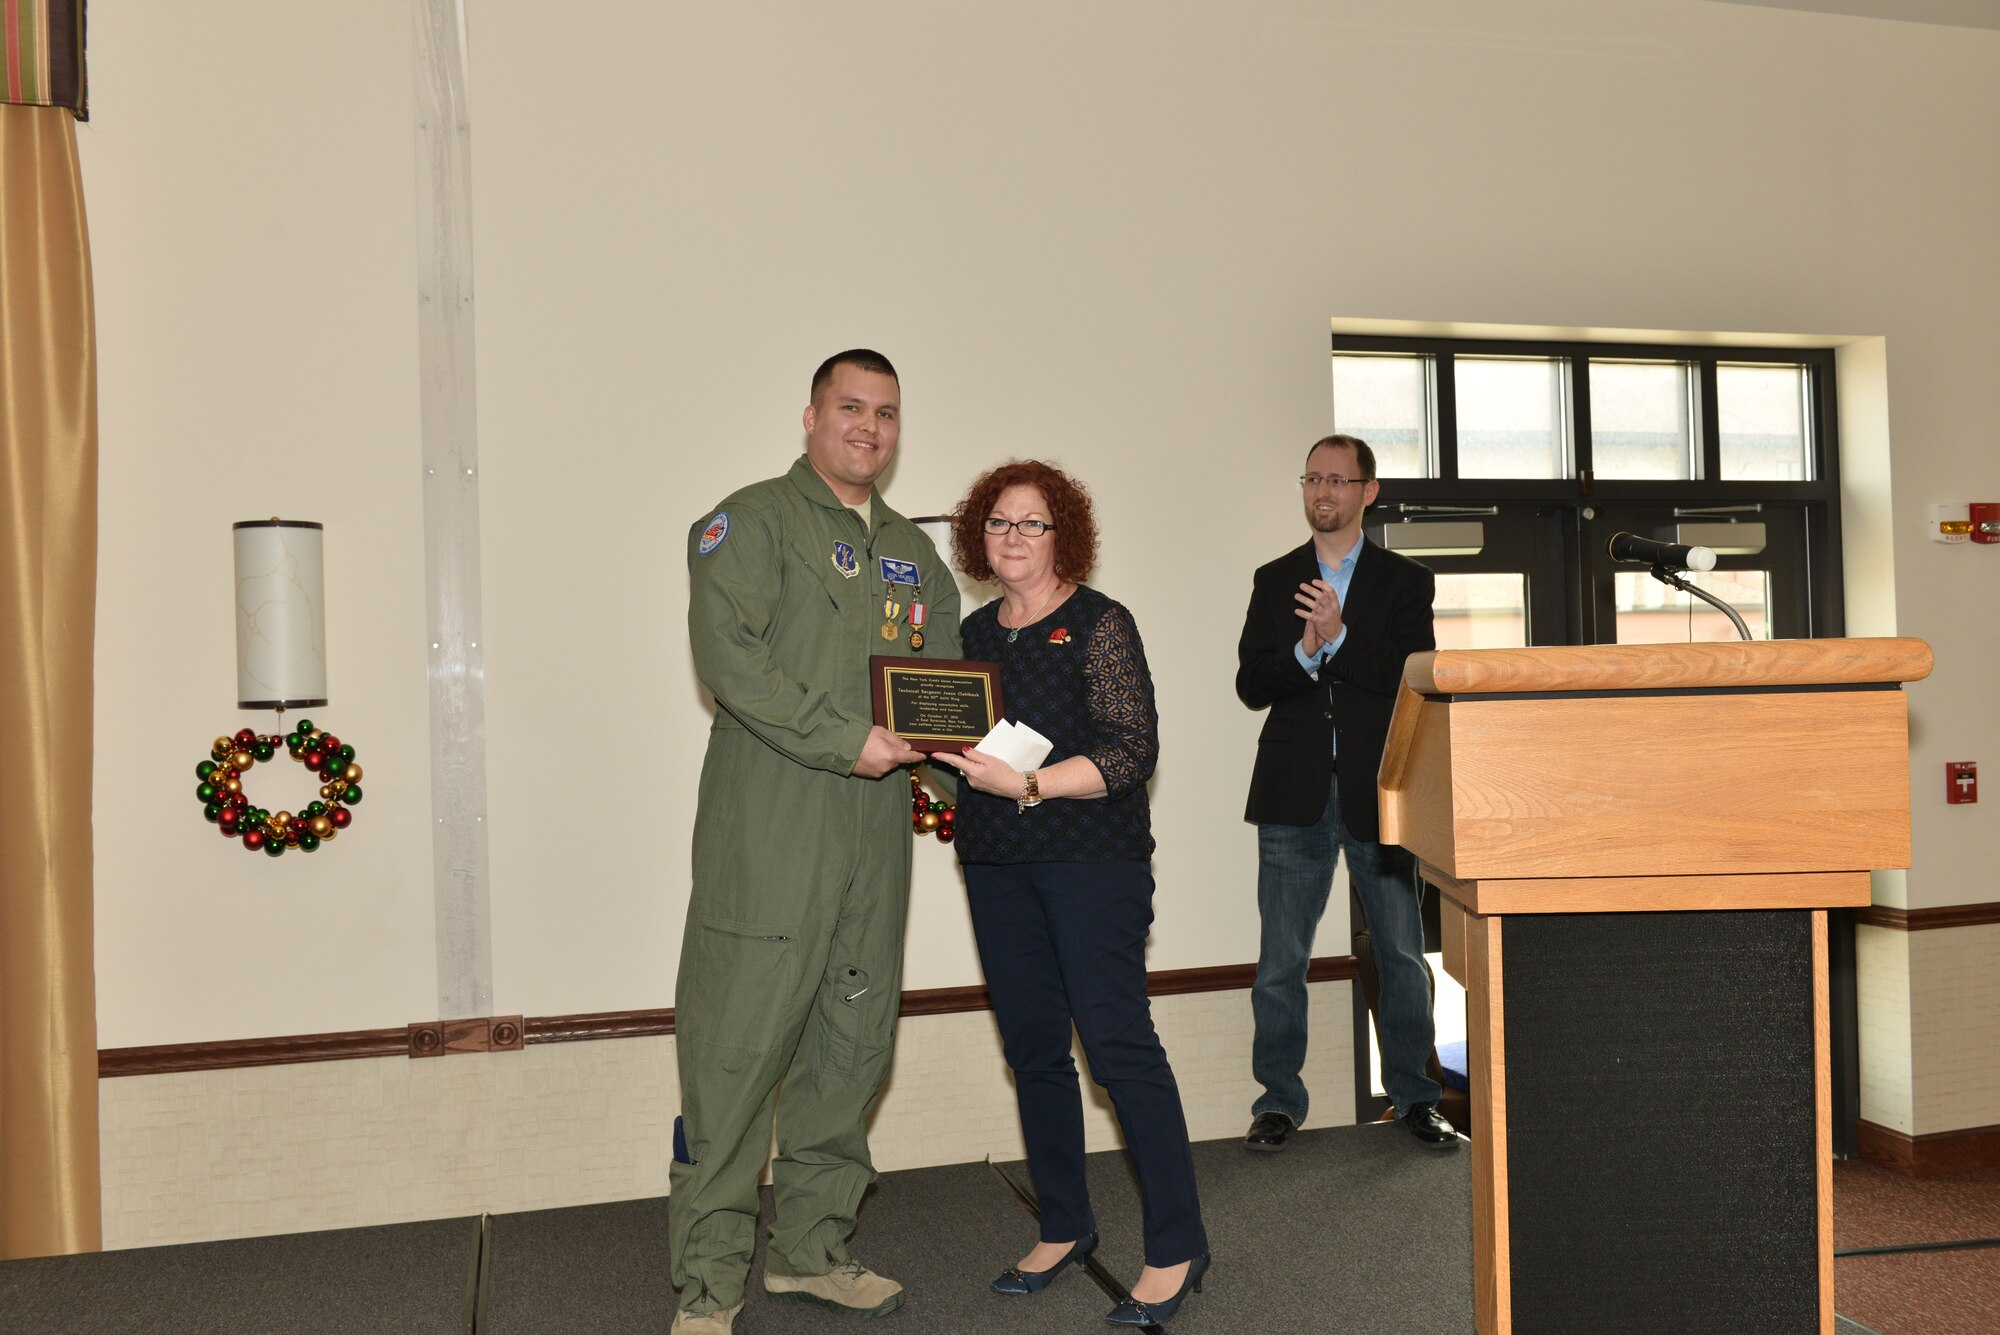 Tech. Sgt. Jason Oehlbeck receives an award from Marie Betti Dec. 6, 2015. The New York Credit Union Association recognized Oehlbeck for displaying remarkable skills, leadership and heroism when he saved the life of one of their colleagues by performing CPR. (U.S. Air National Guard Photo/Senior Master Sgt. Ray Lloyd)